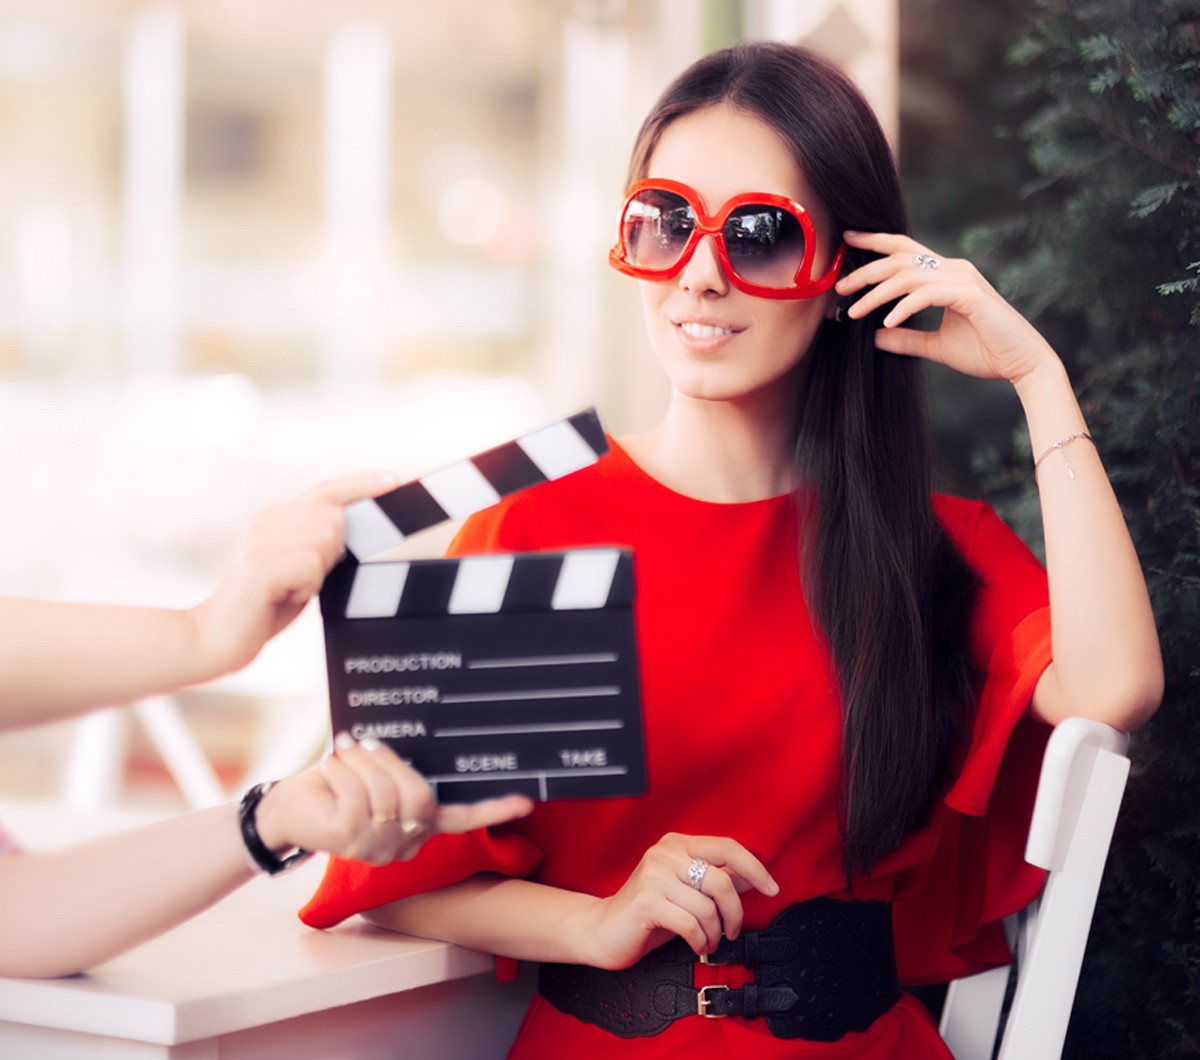 An actress prepares to shoot a scene as a stage hand holds the clapperboard.